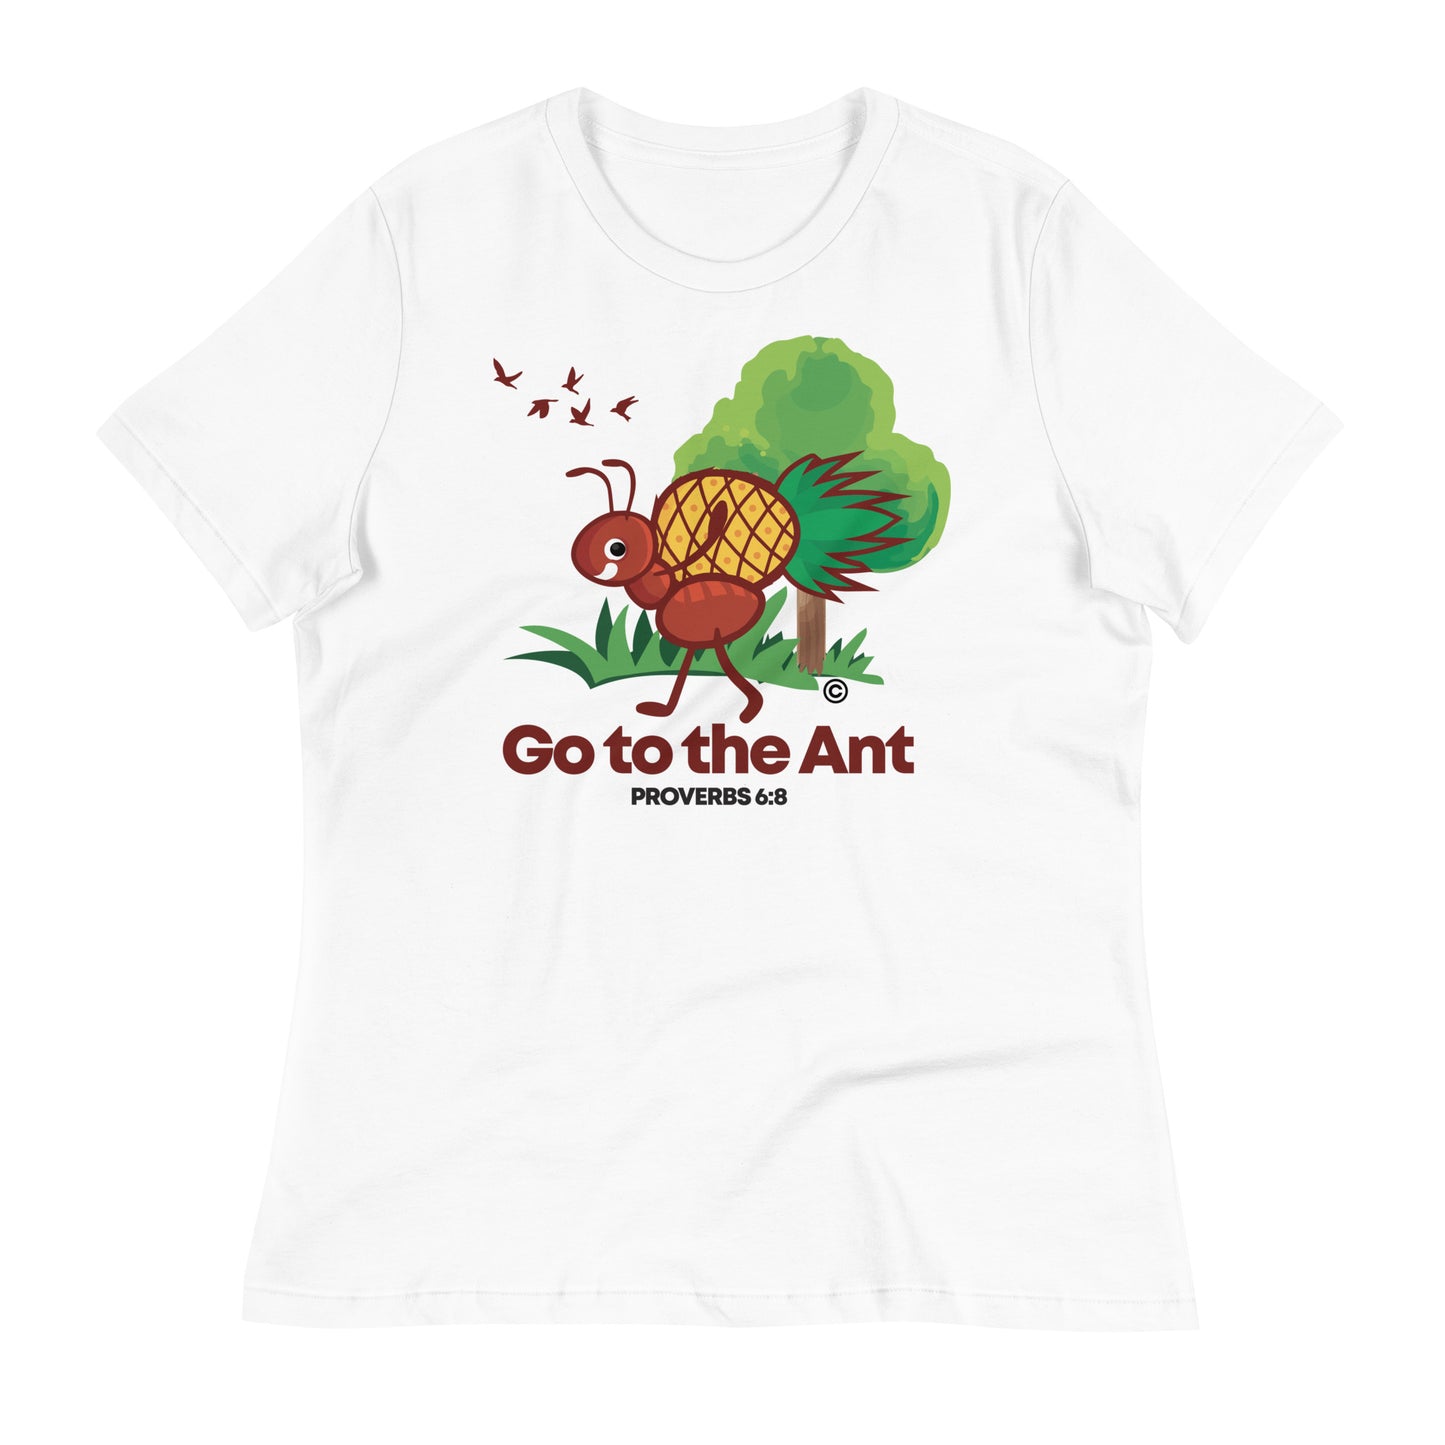 Go to the Ant Women's Relaxed T-Shirt